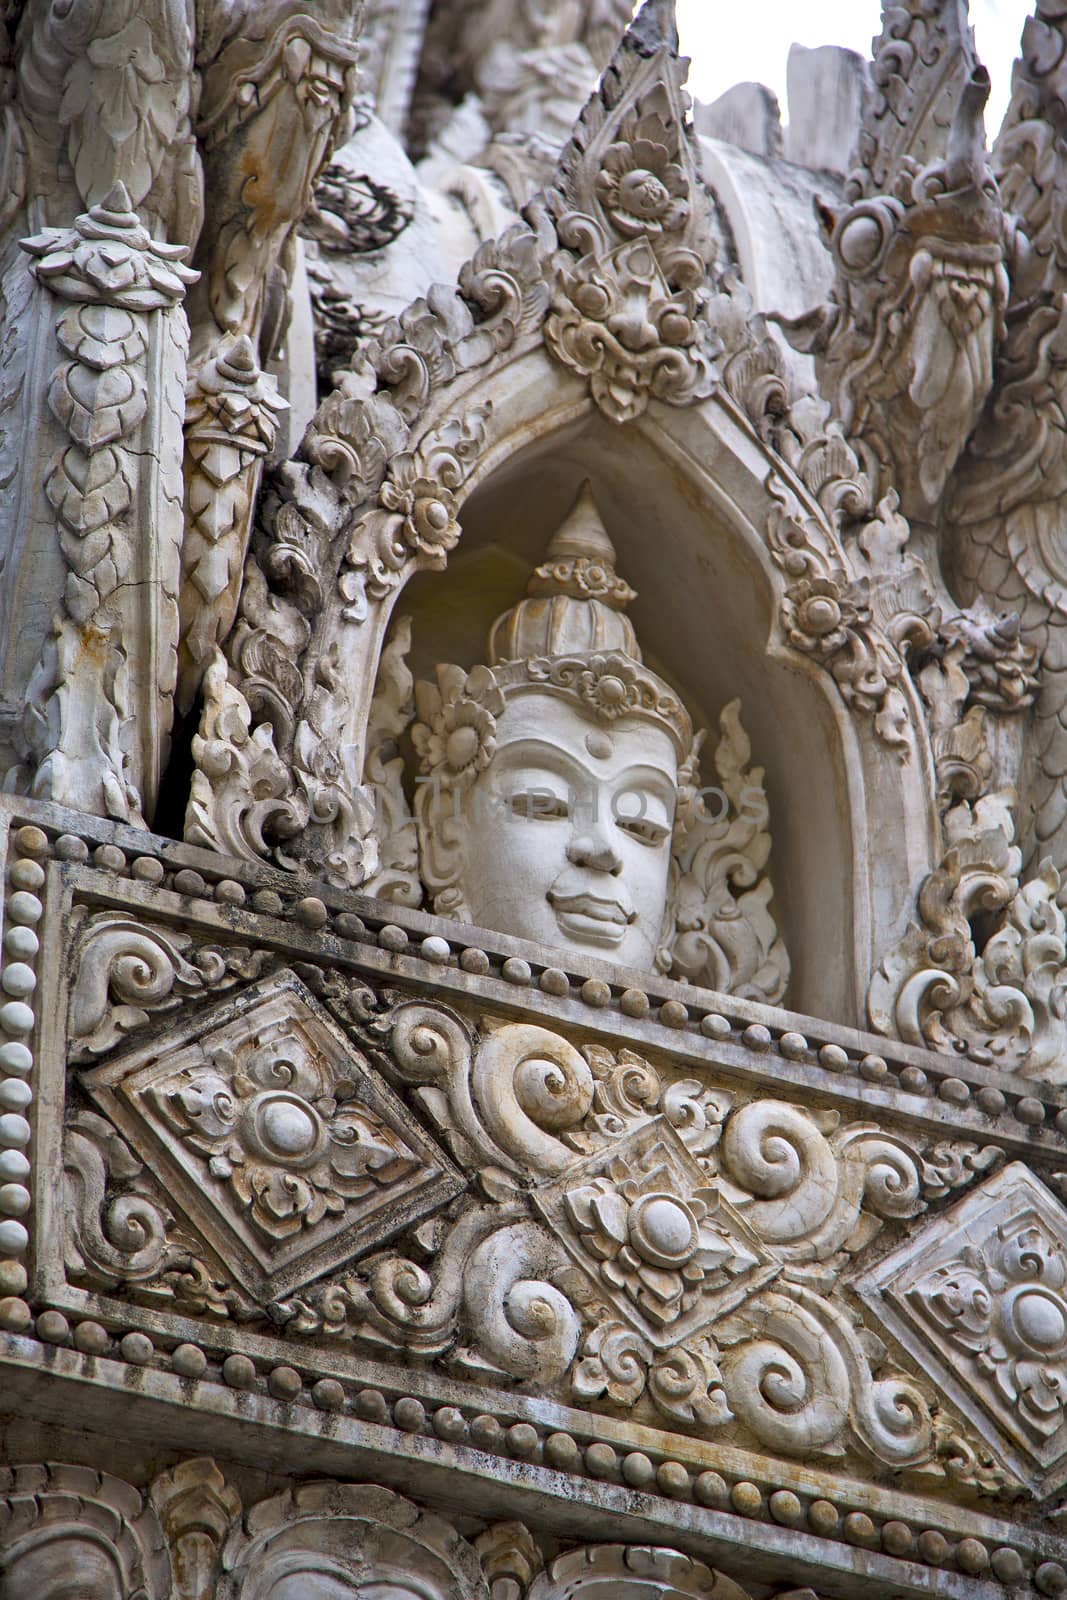 siddharta   in the temple bangkok asia   head by lkpro